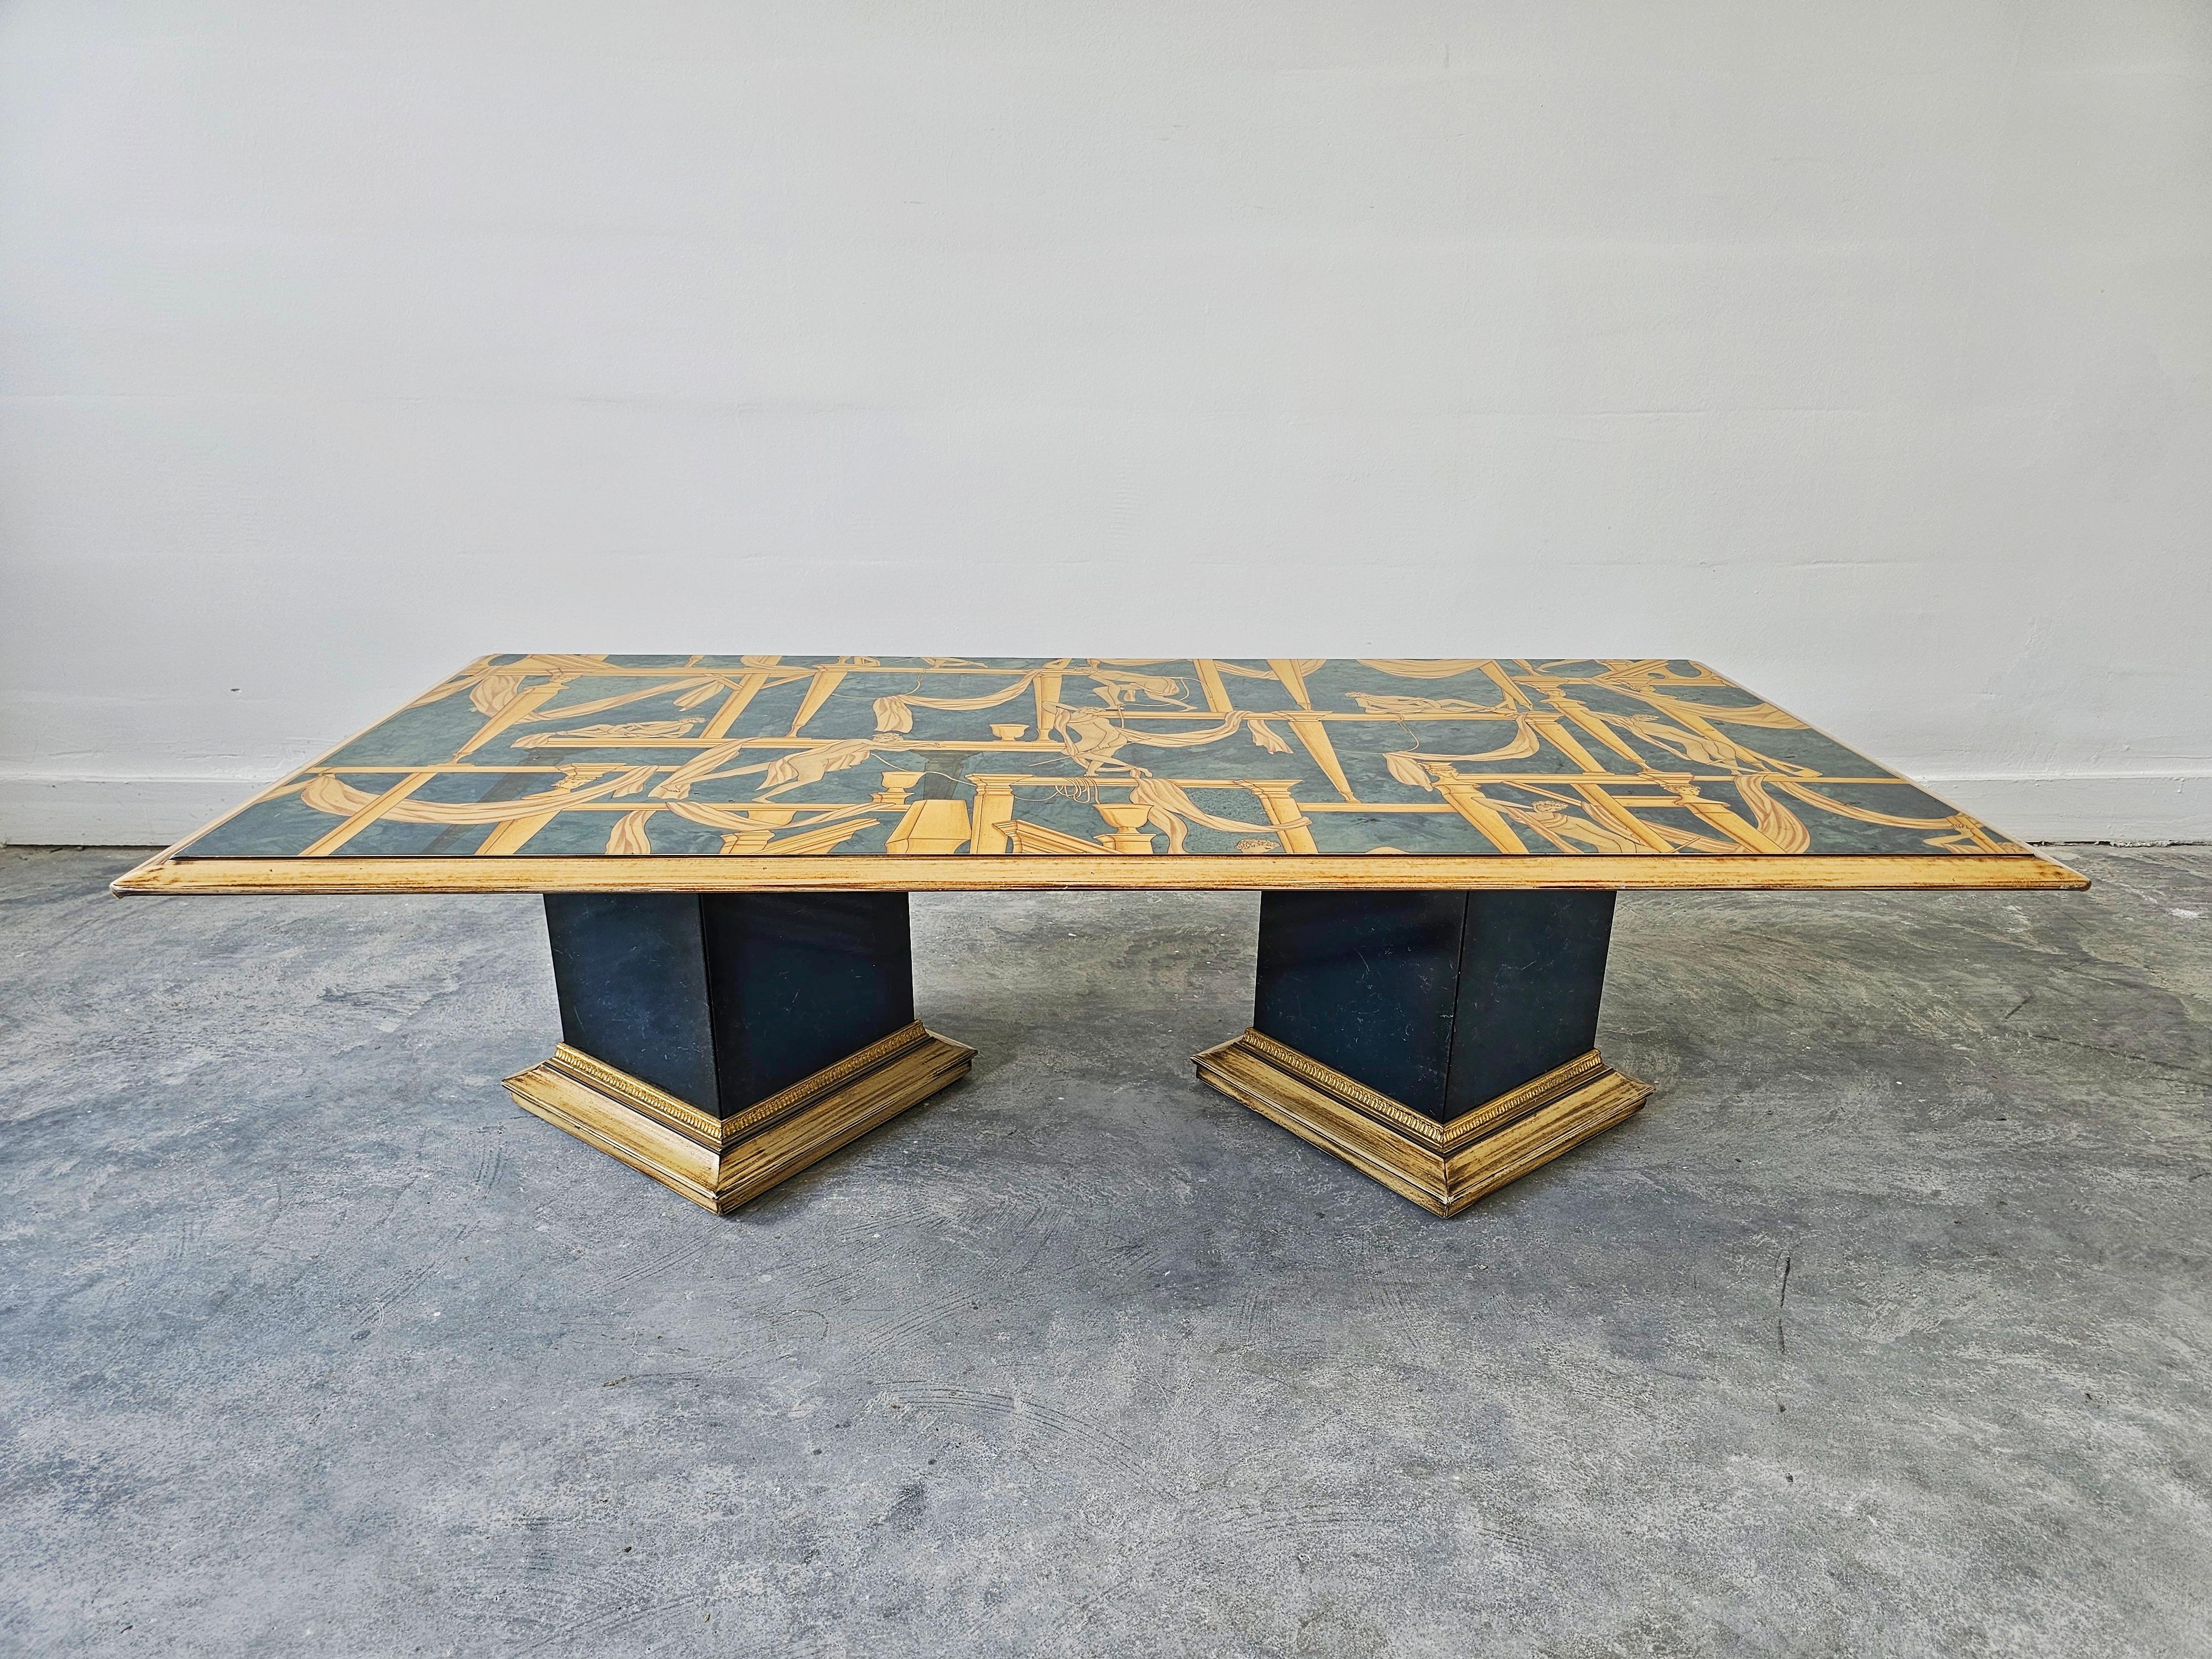 In this listing you will find a stunning Art Deco inspired coffee table with a gorgeous top design, which was originally designed by Gio Ponti for the renowned ceramic manufacturer Richard Ginori in 1923. The original design was initially used for